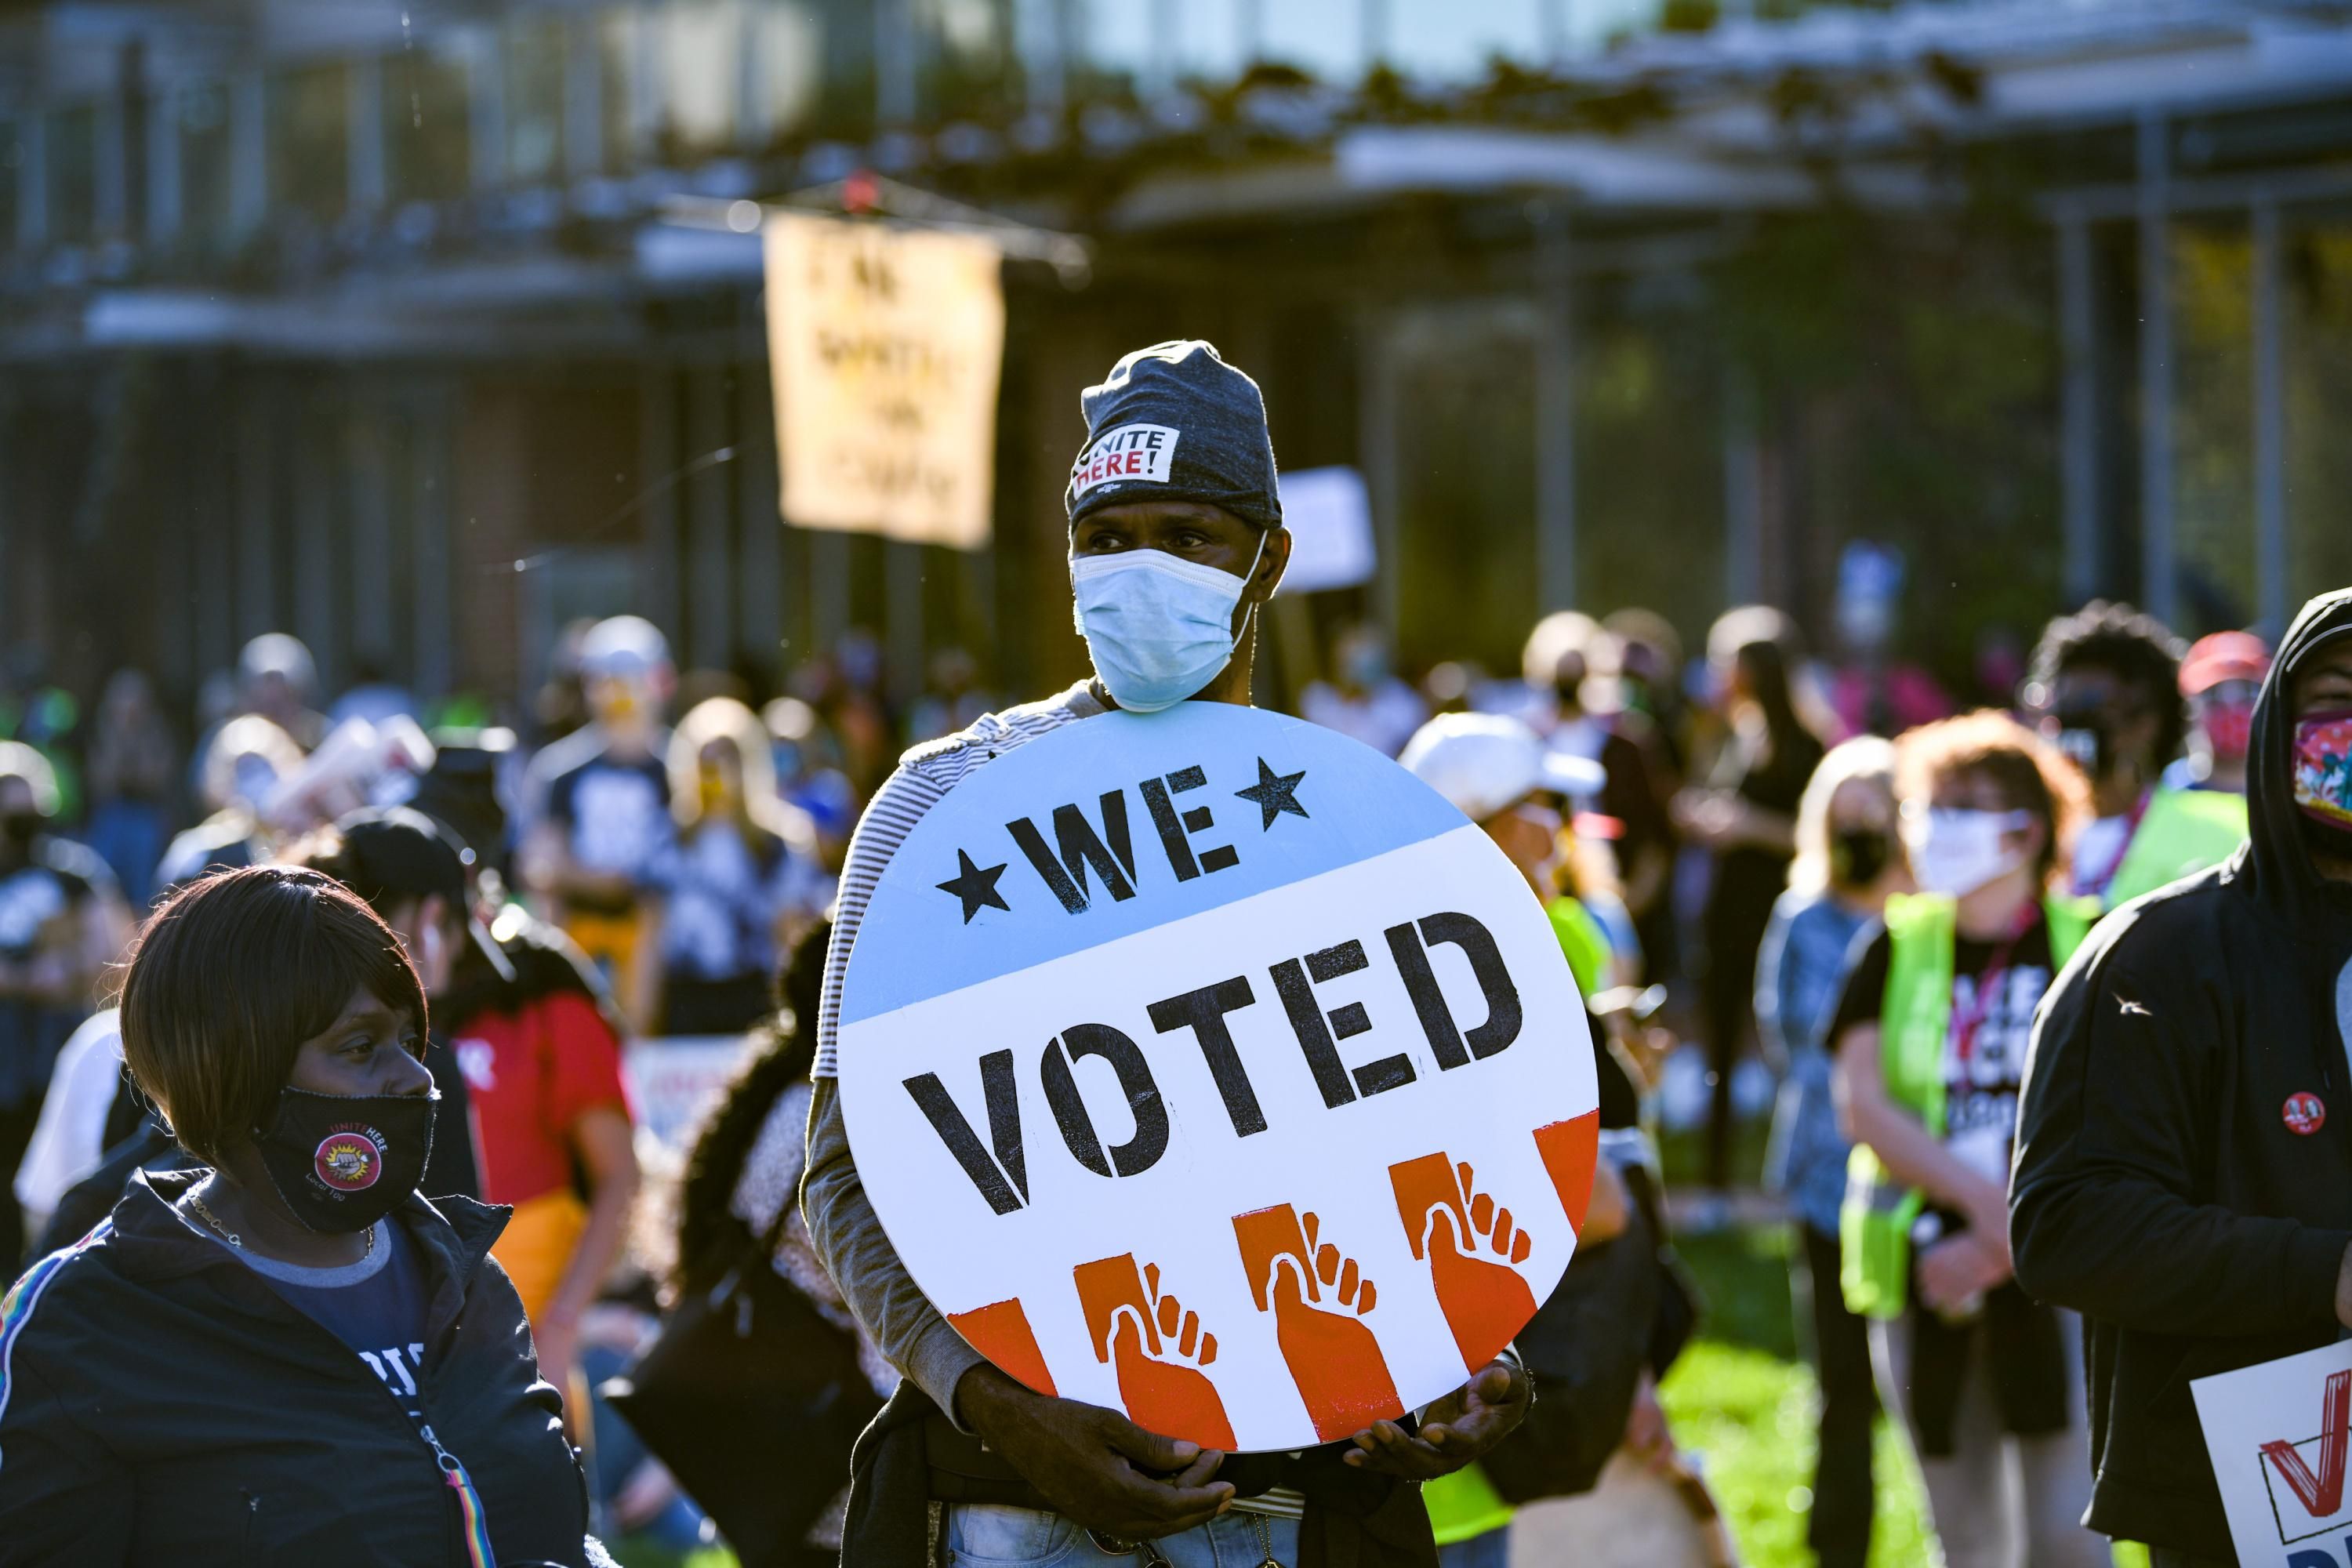 People gathered at the Count Every Vote Rally in Philadelphia at Independence Hall on November 7, 2020. (Photo: Bryan Bedder via Getty Images for MoveOn)